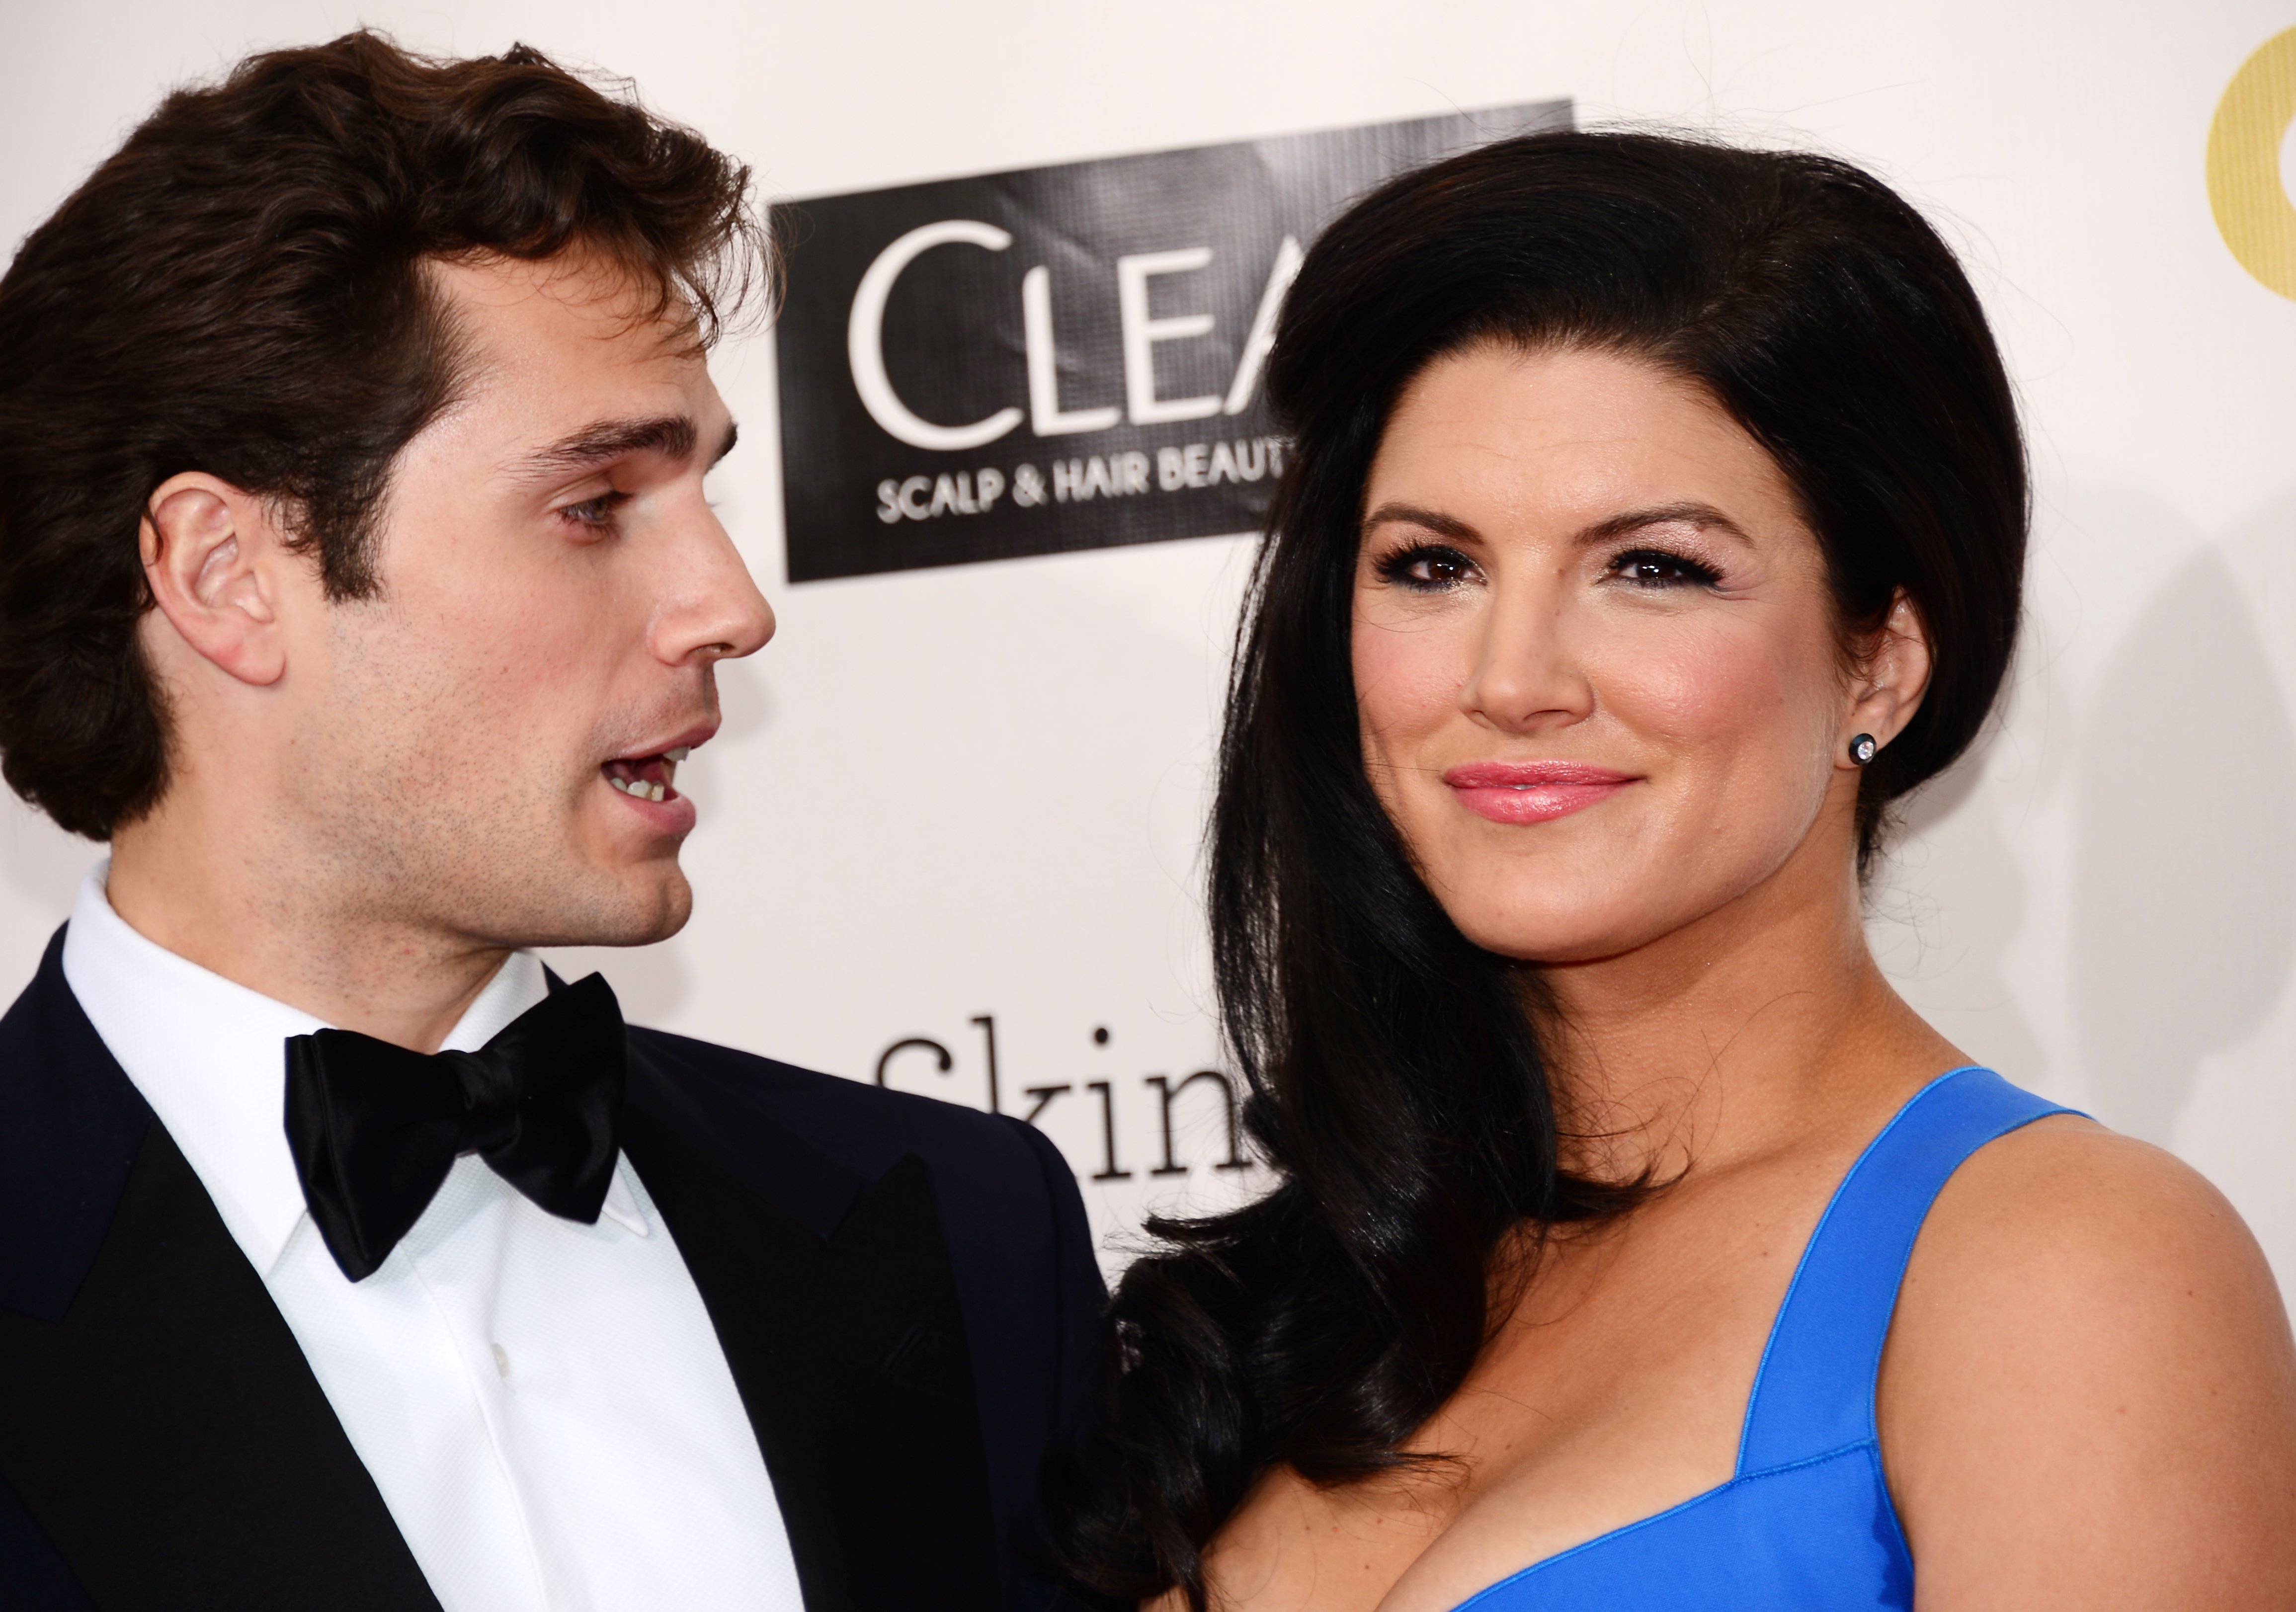 Henry Cavill and Gina Carano at the 18th annual Critics' Choice Movie Awards on January 10, 2013, in Santa Monica, California. | Source: Getty Images